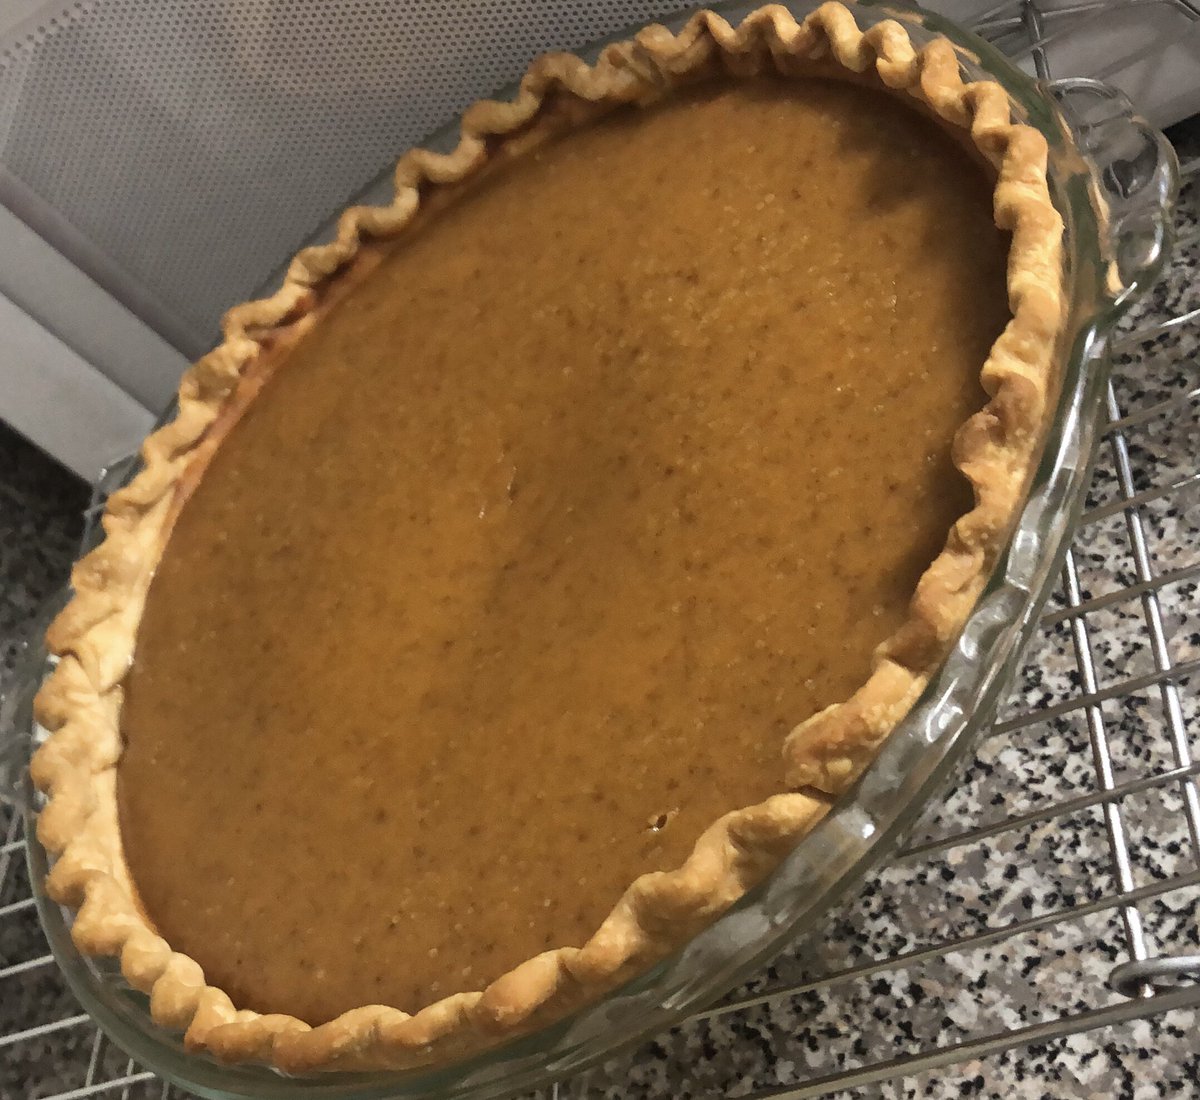 There is no reason to spend money on buying a pumpkin pie when they are soo...